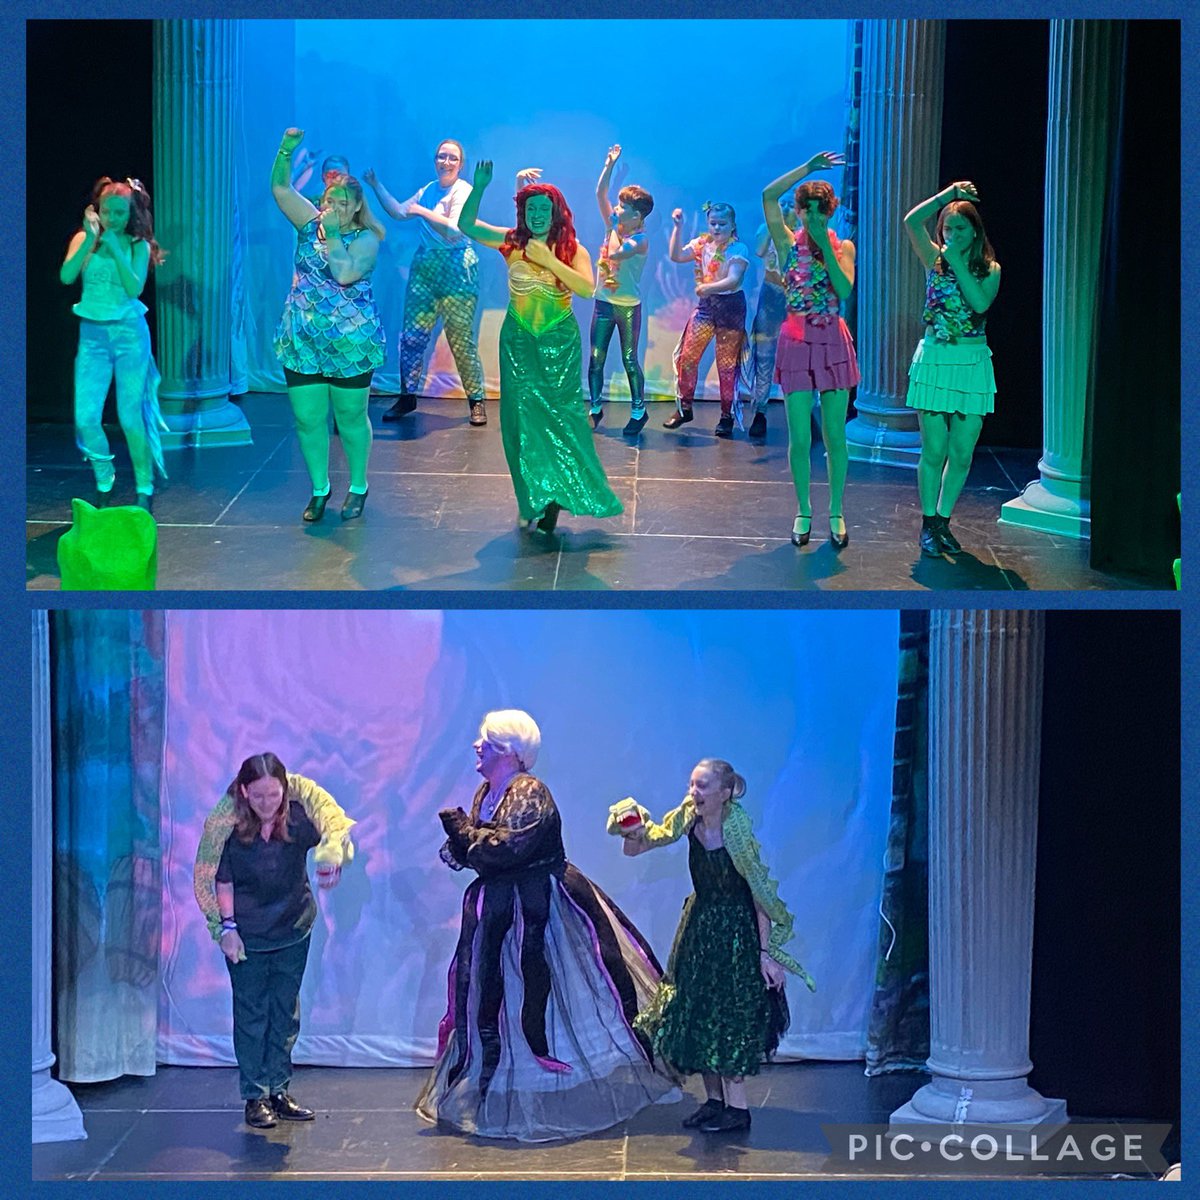 What a fantastic morning our #FoundationPhase had laughing, cheering, booing, clapping and singing along at @RedhouseCymru watching #TheLittleMermaid #Pantomime @MerthyrCBC @WellbeinMerthyr #ChristmasTime